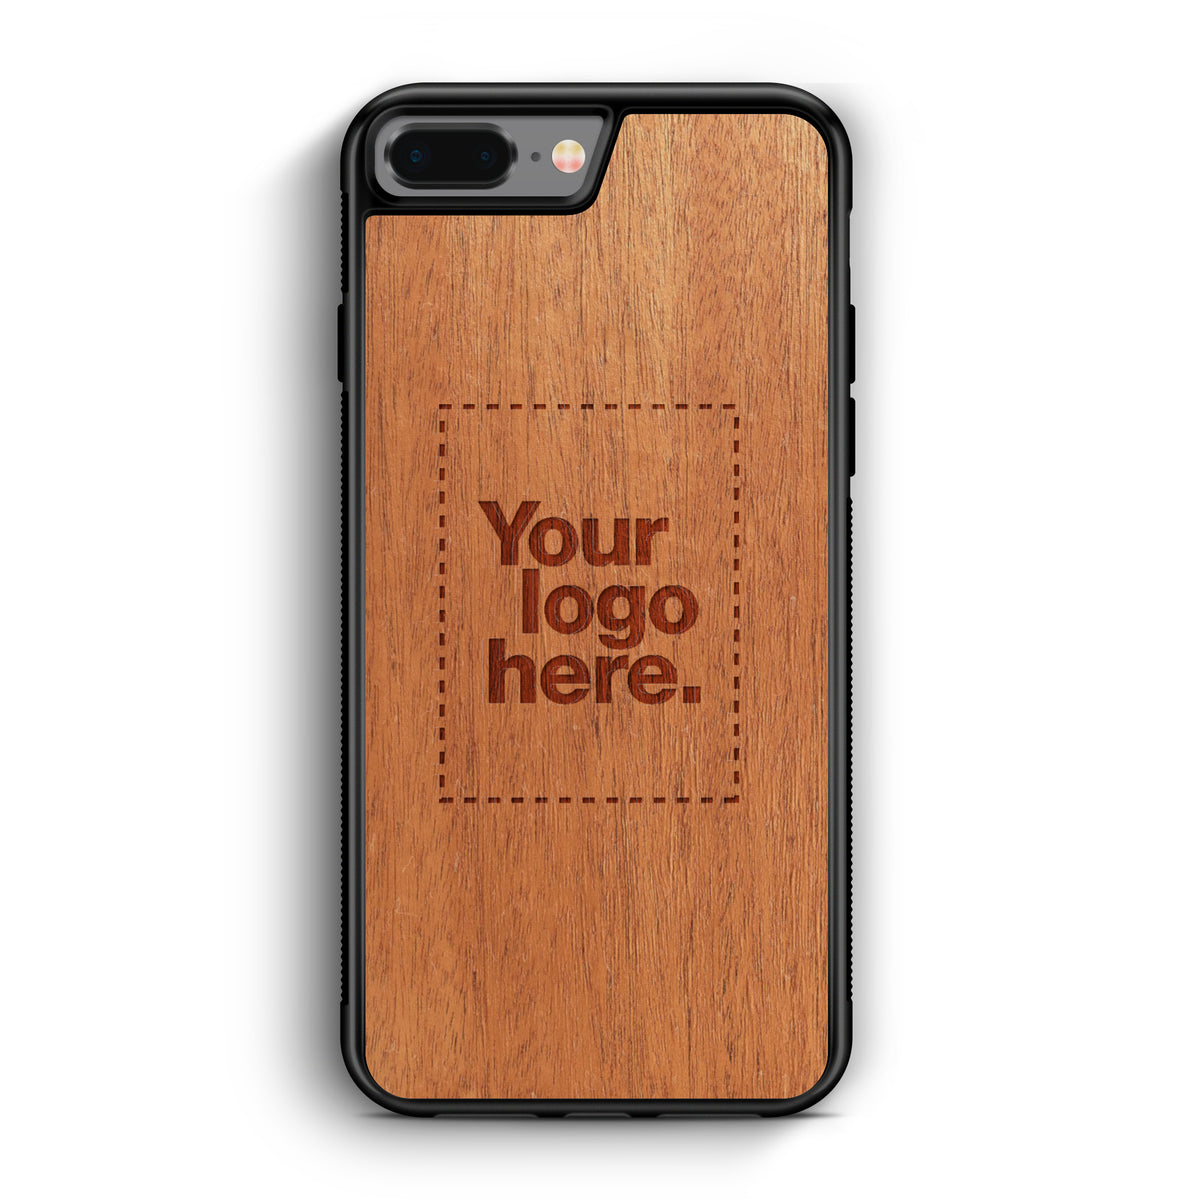 Custom carved burnt customized personalized laser engraved wooden Apple iPhone 7 Plus, iPhone 8 Plus